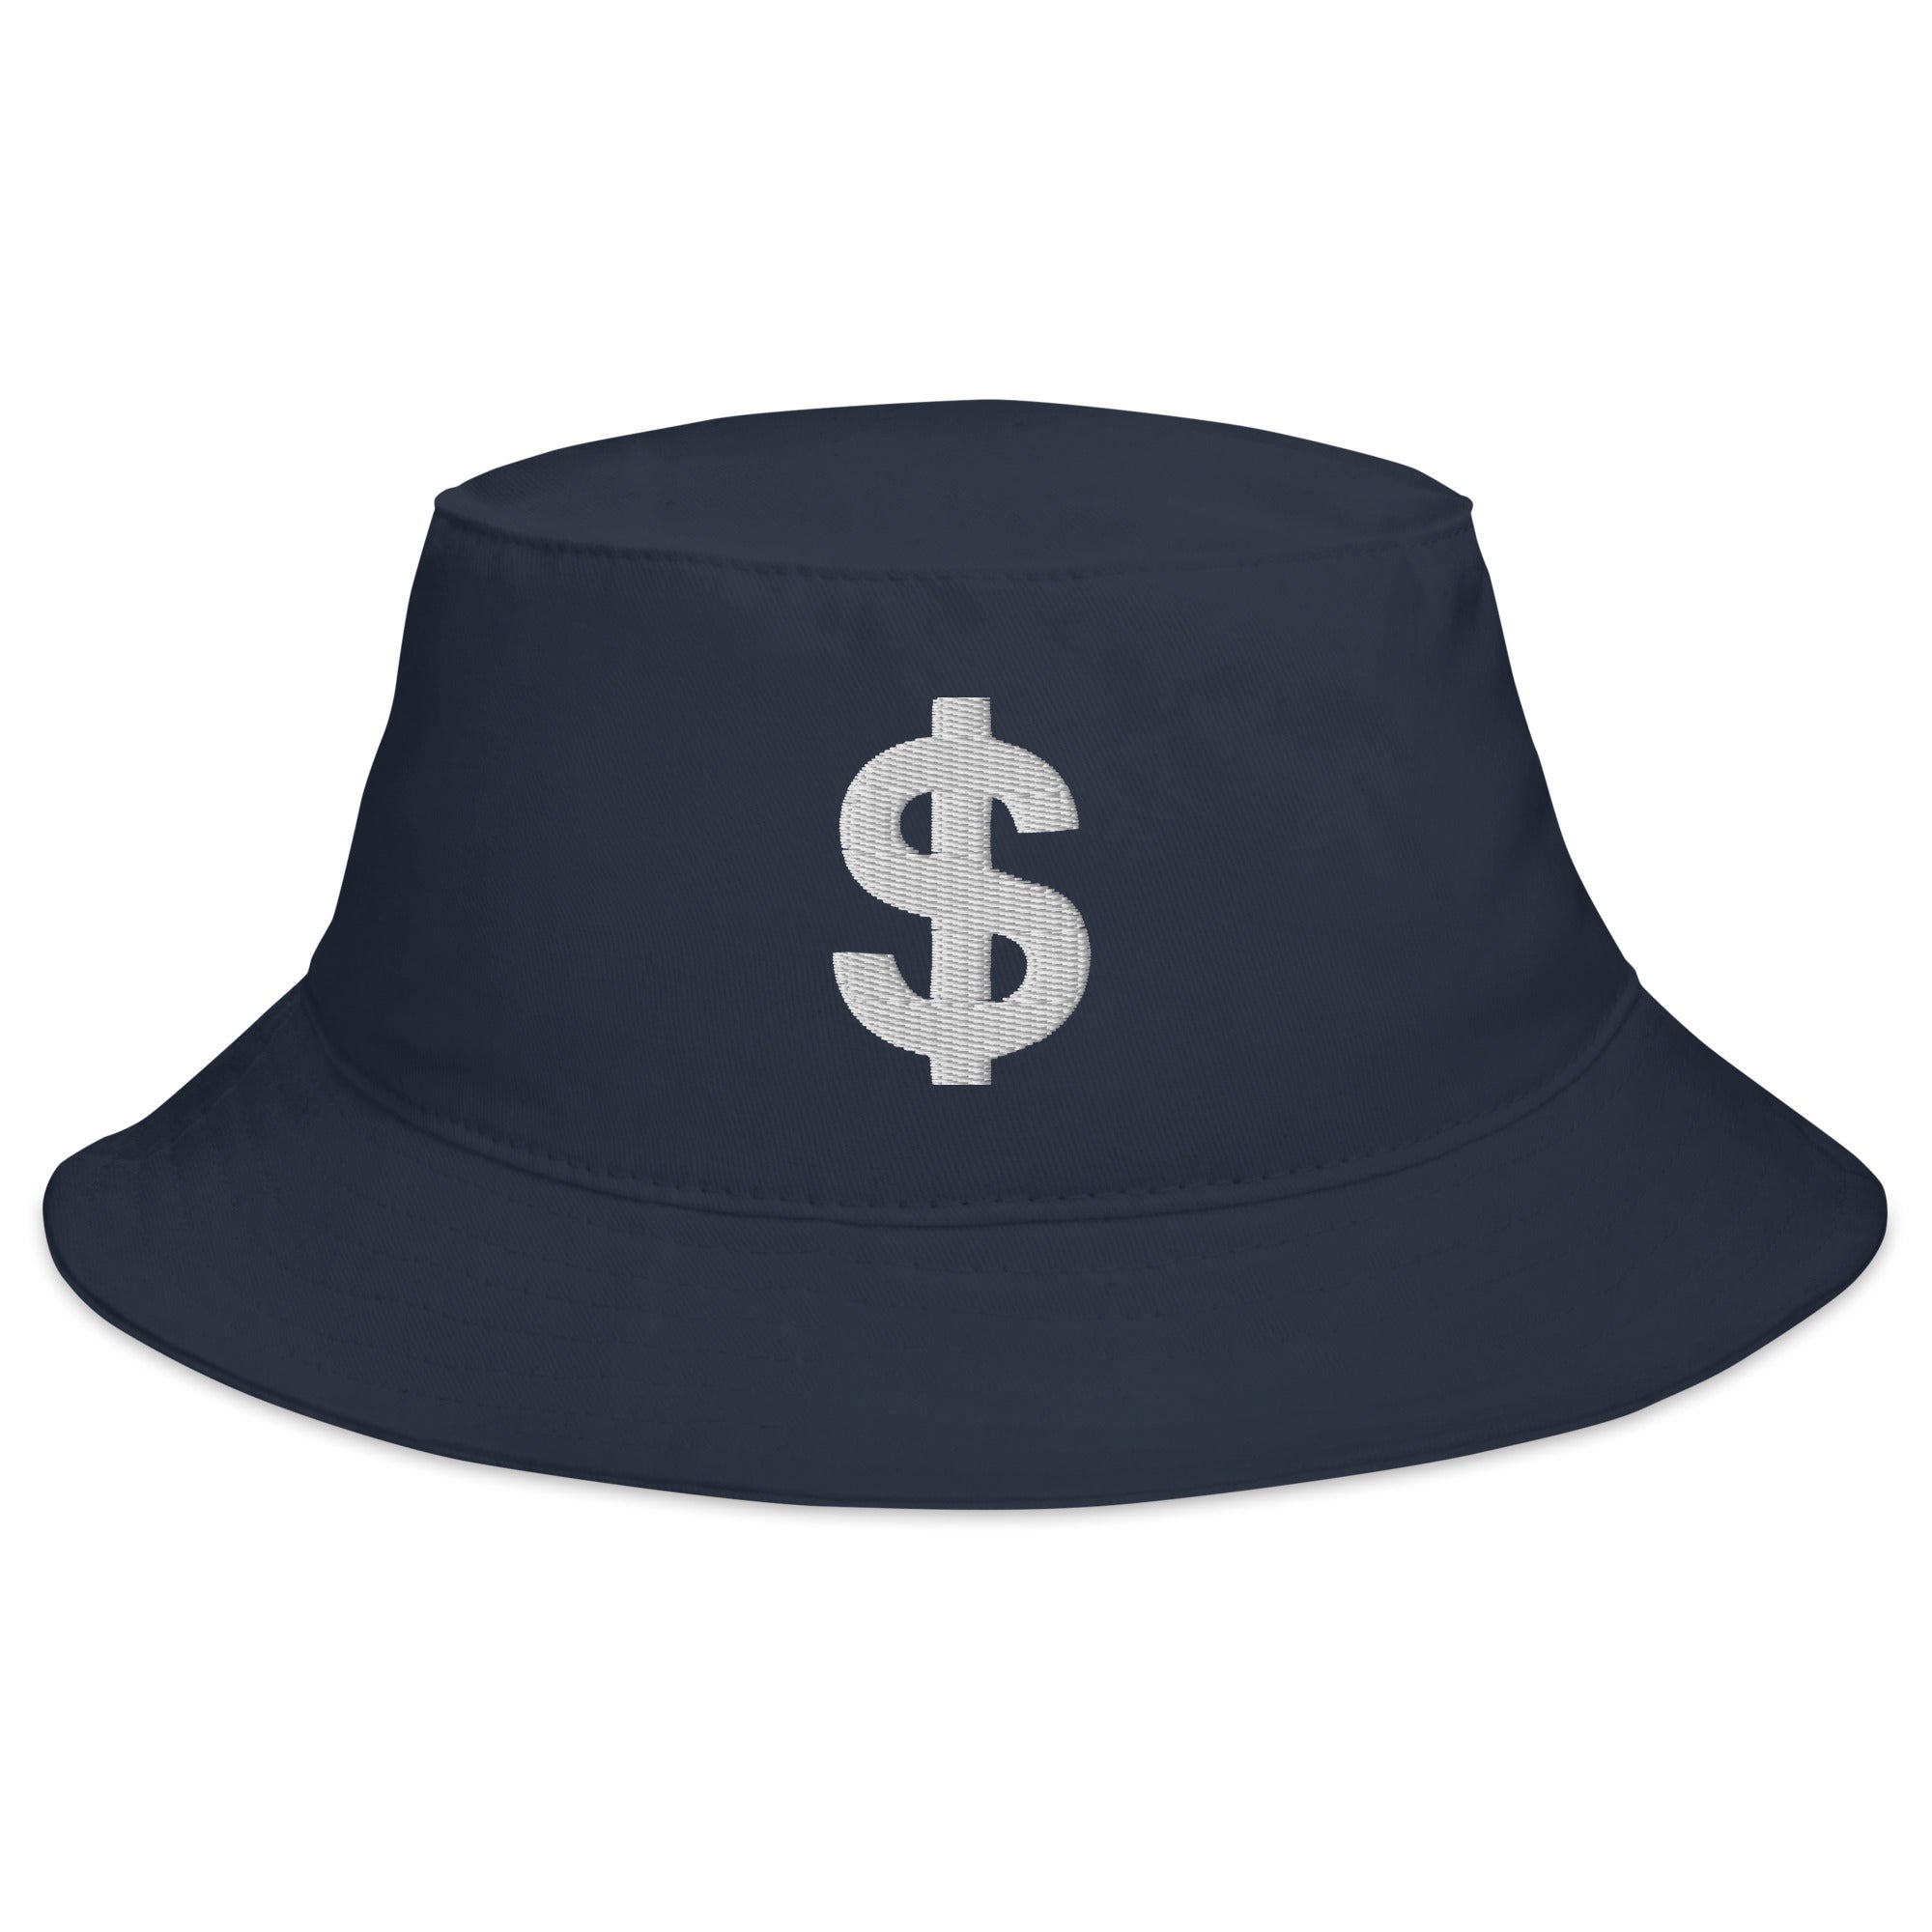 The Almighty US Dollar Sign Symbol of Money Embroidered Bucket Hat